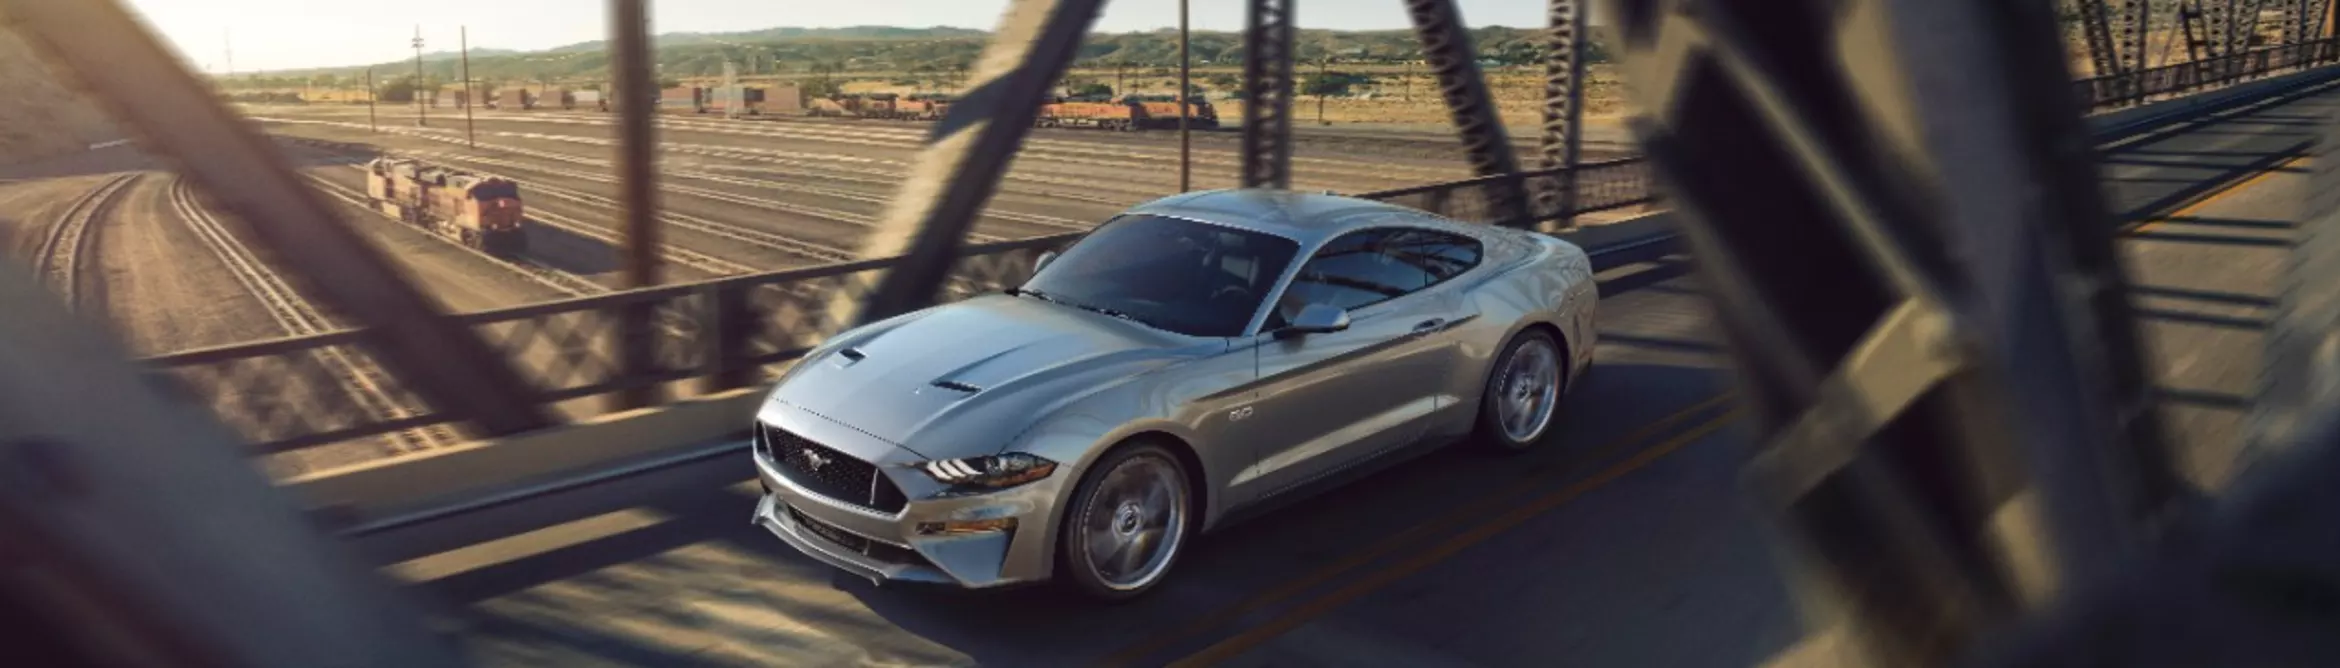 New 2018 facelift Ford Mustang set to offer sleeker design, more tech and improved performance!